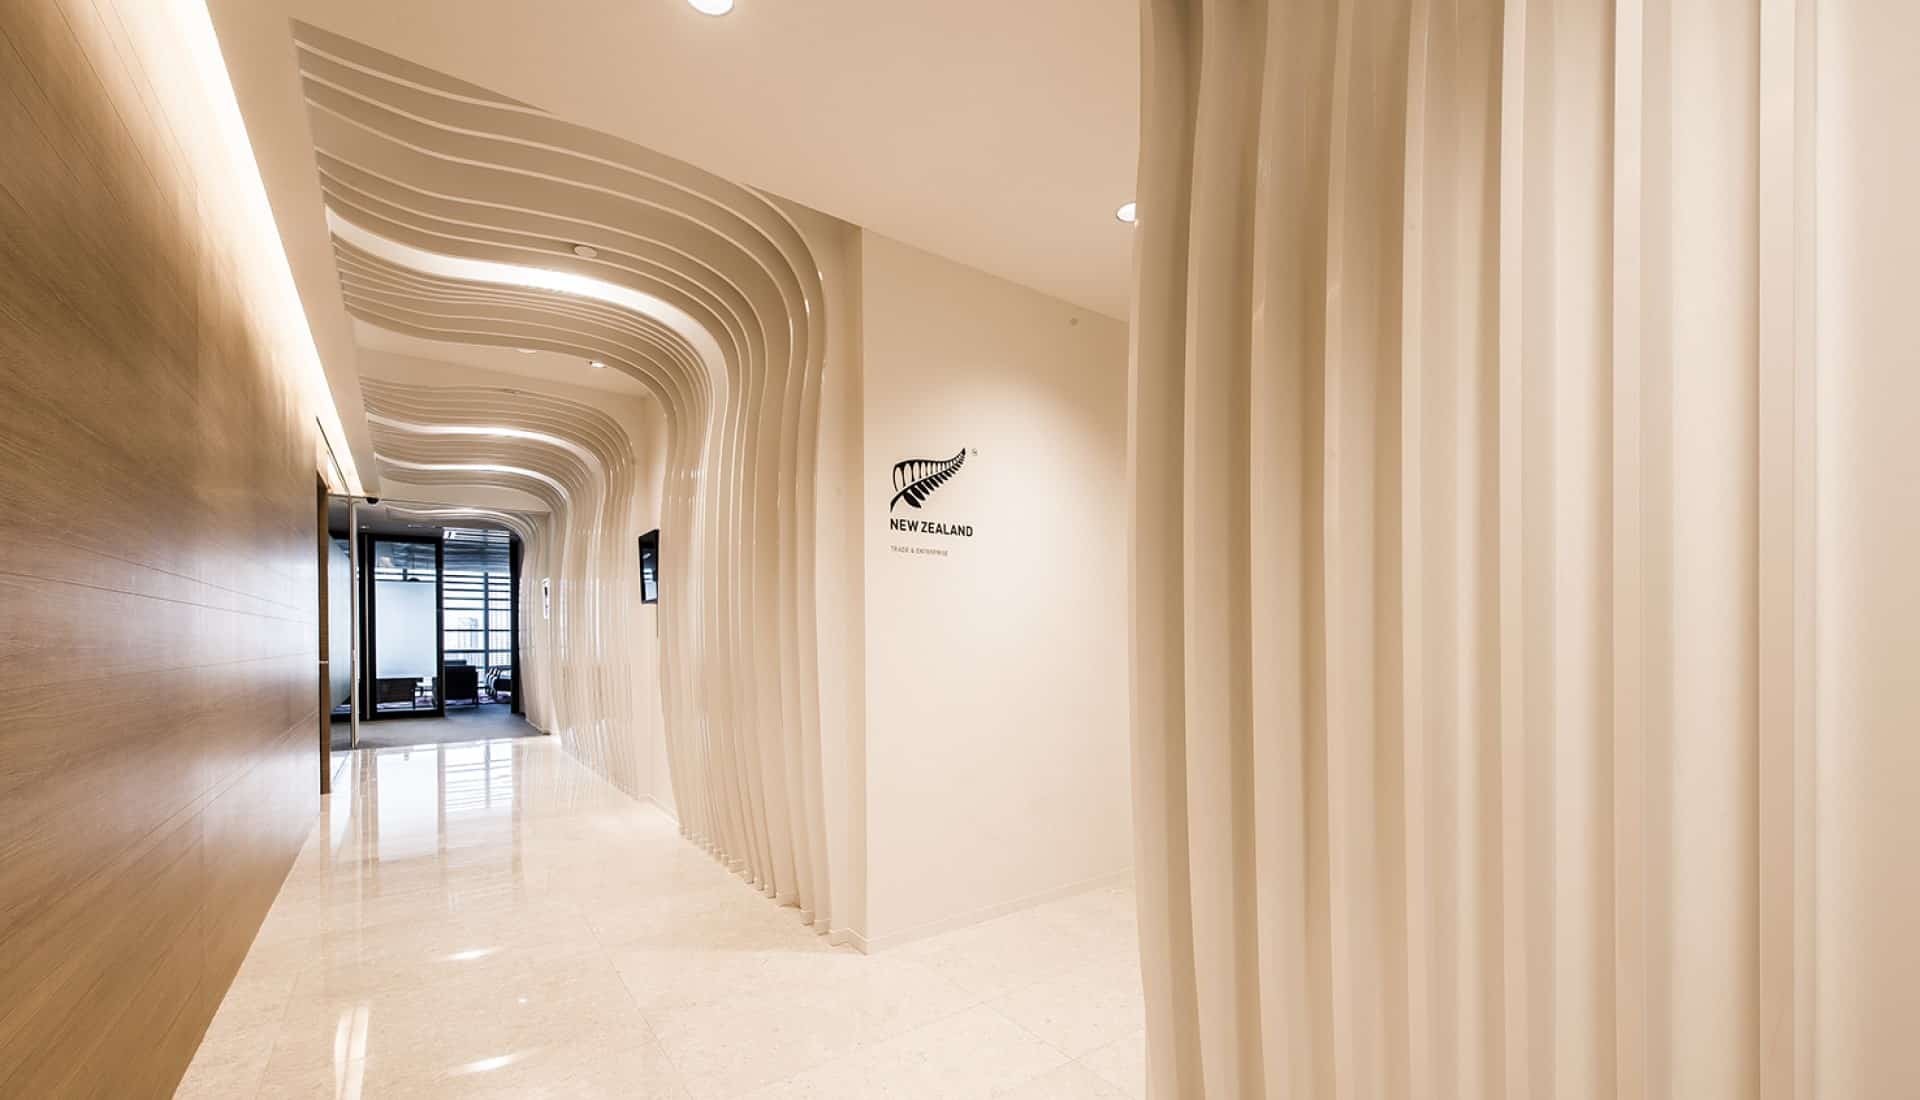 Ministry of Foreign Affairs and Trade office Singapore entrance design including white curved archways and New Zealand silver fern